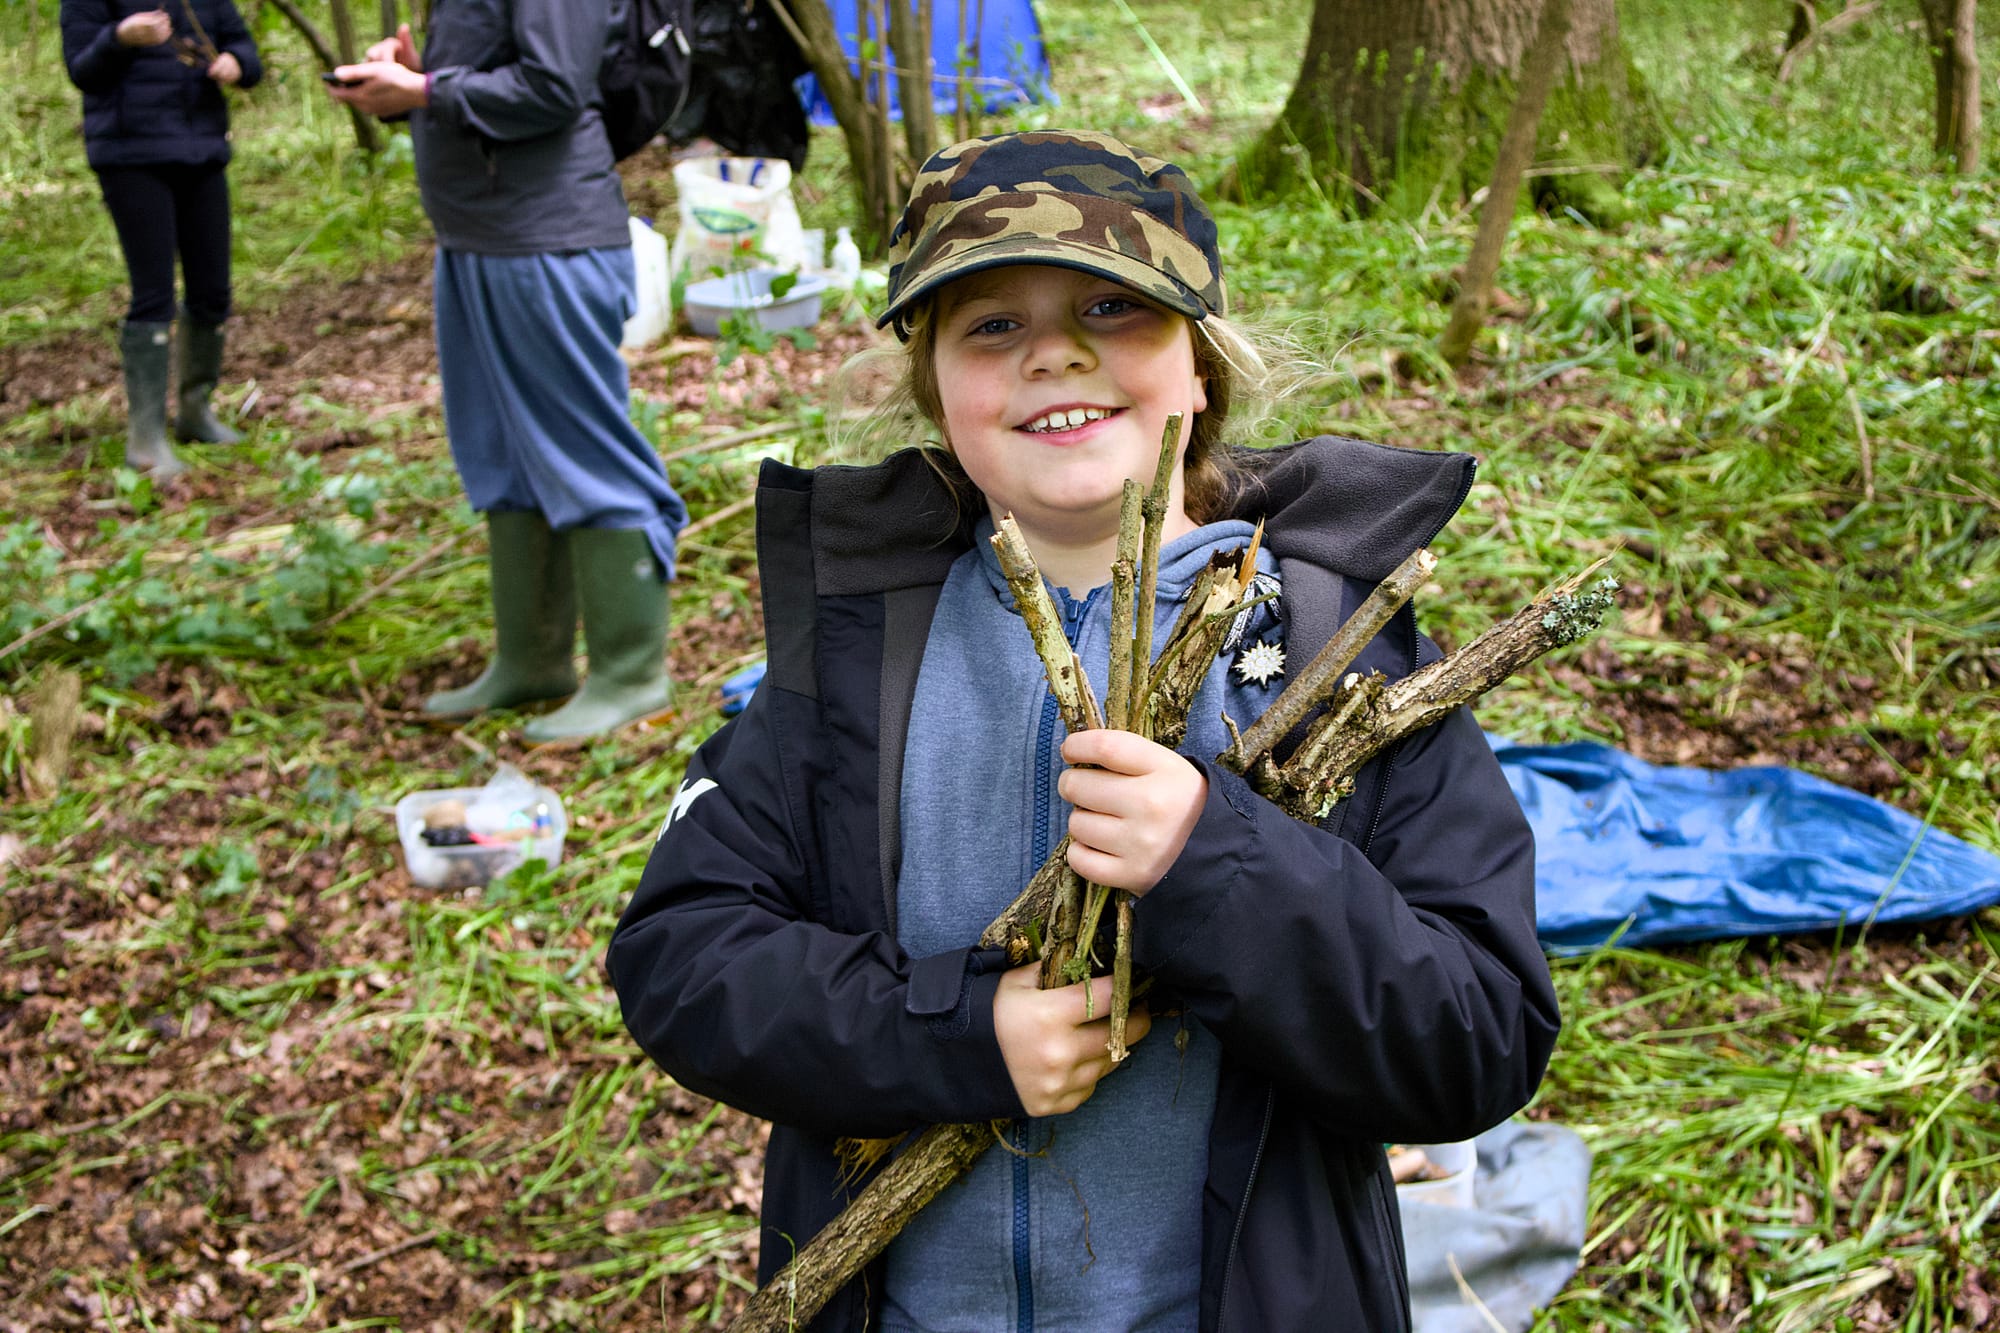 A nine-year old girl in outdoors clothes, clutching sticks in a forest school setting